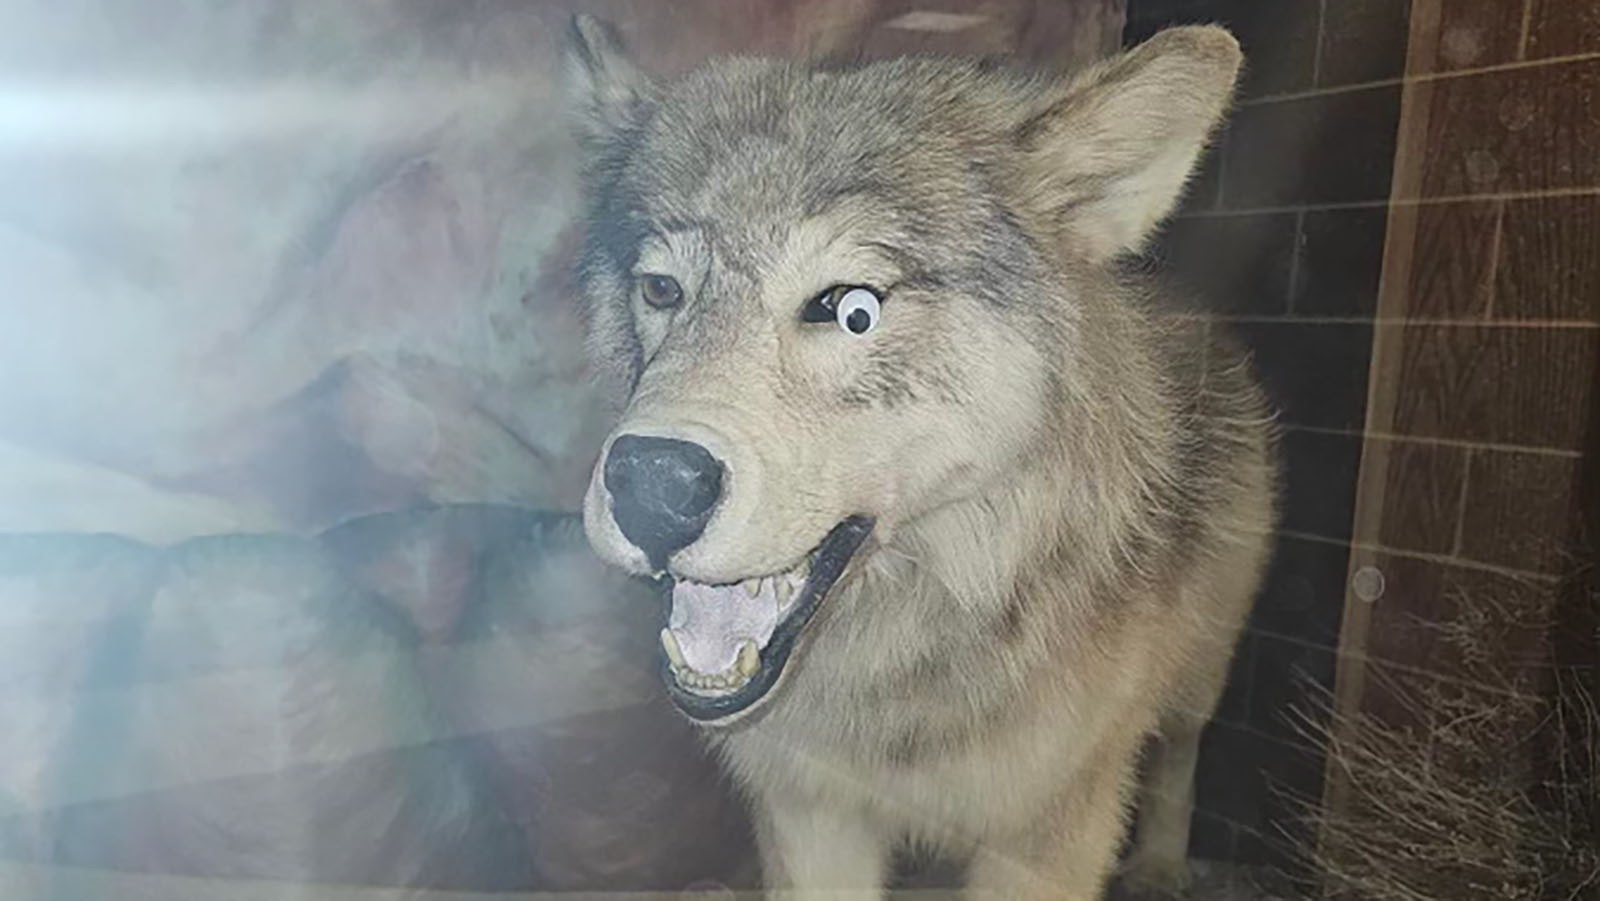 Sticking a plastic googly eye on a taxidermy wolf on display at Green River High School was the crowning achievement of the 2024 senior class prank.